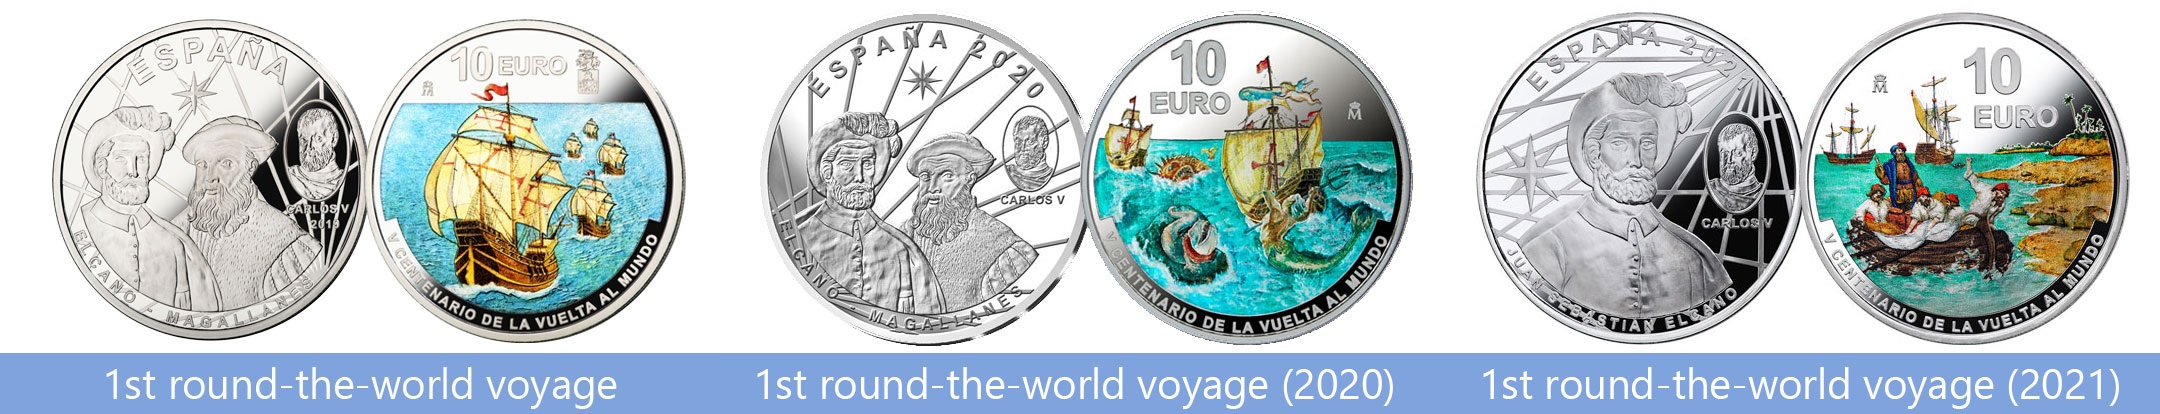 Spain 500th anniversary of the round-the-world voyage 2019-2021 (shop illustration) (zoom)